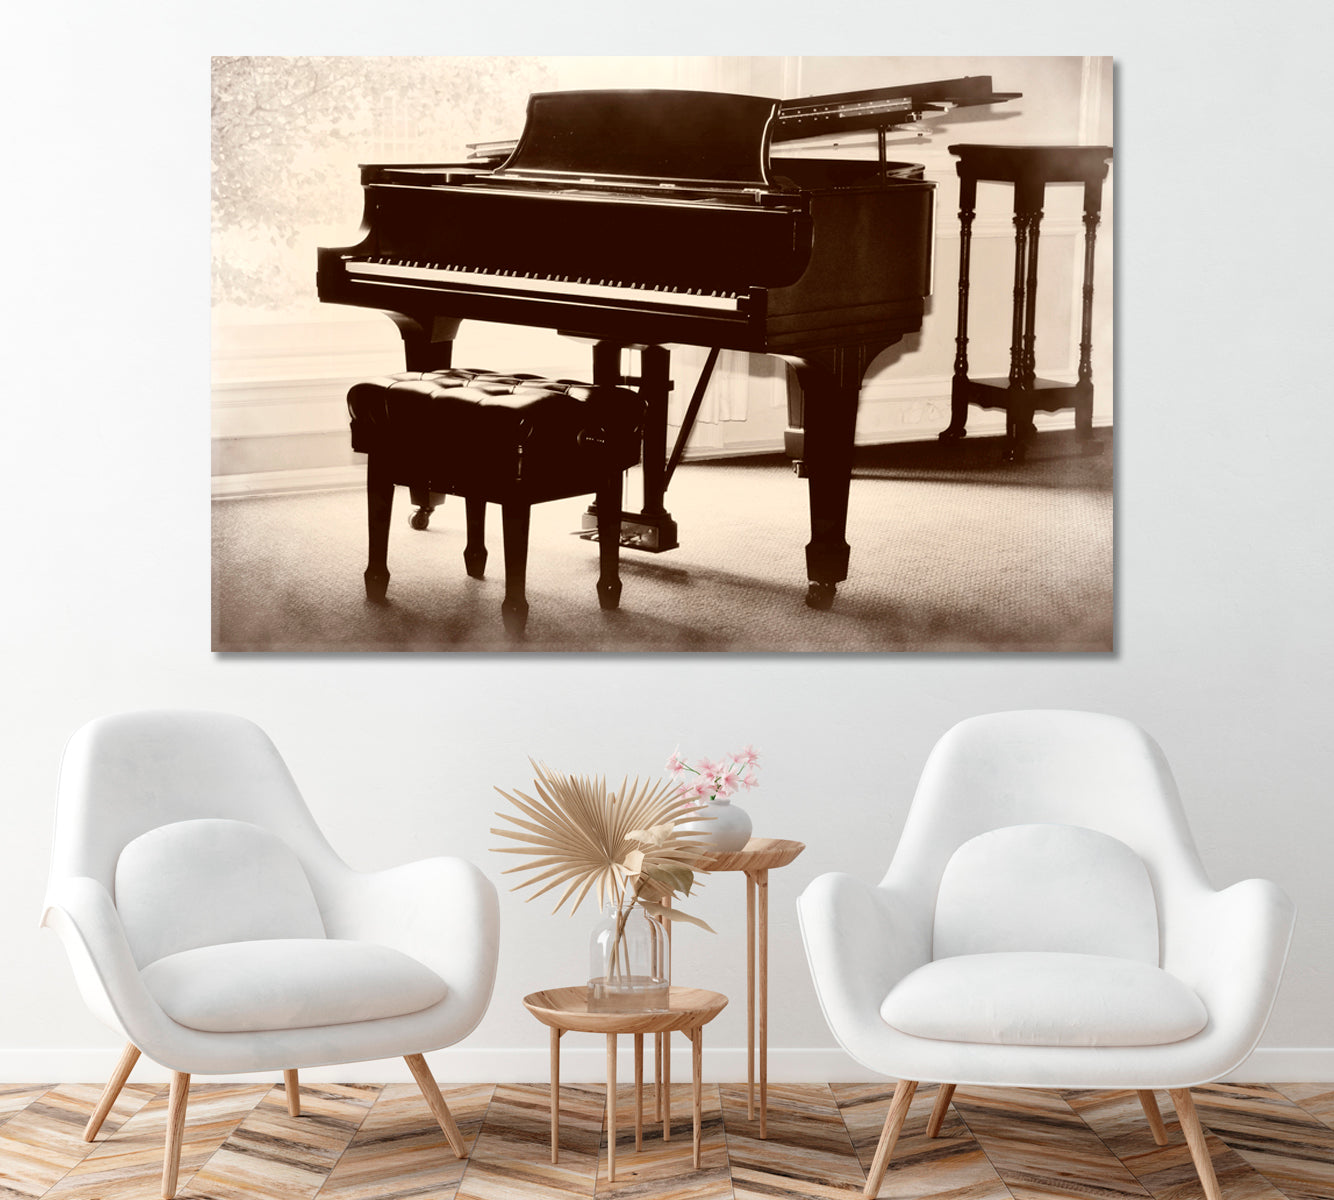 Old Piano Canvas Print ArtLexy 1 Panel 24"x16" inches 